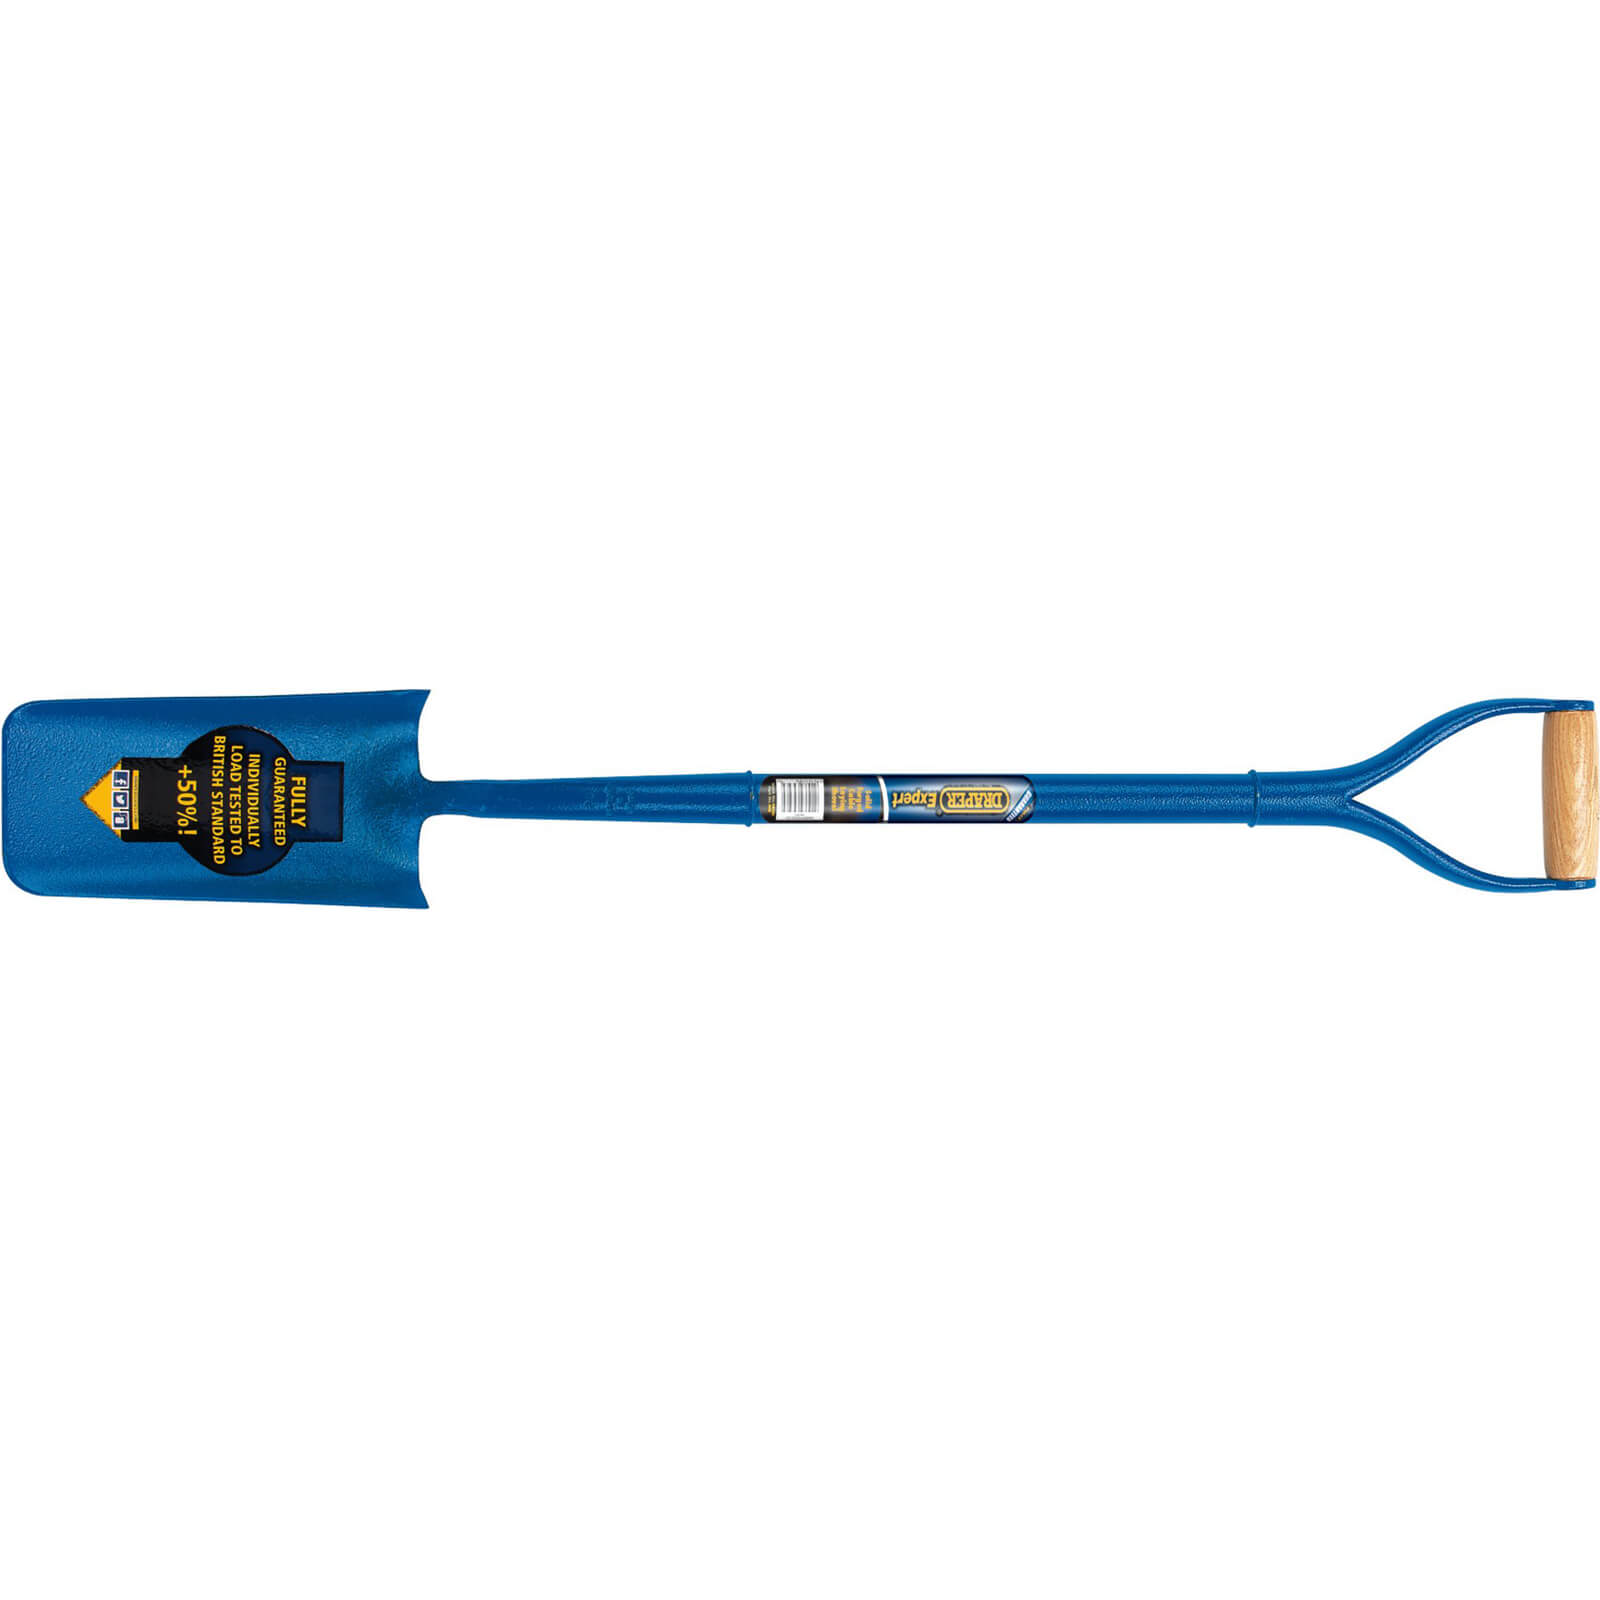 Draper Solid Forged Contractors Cable Laying Shovel